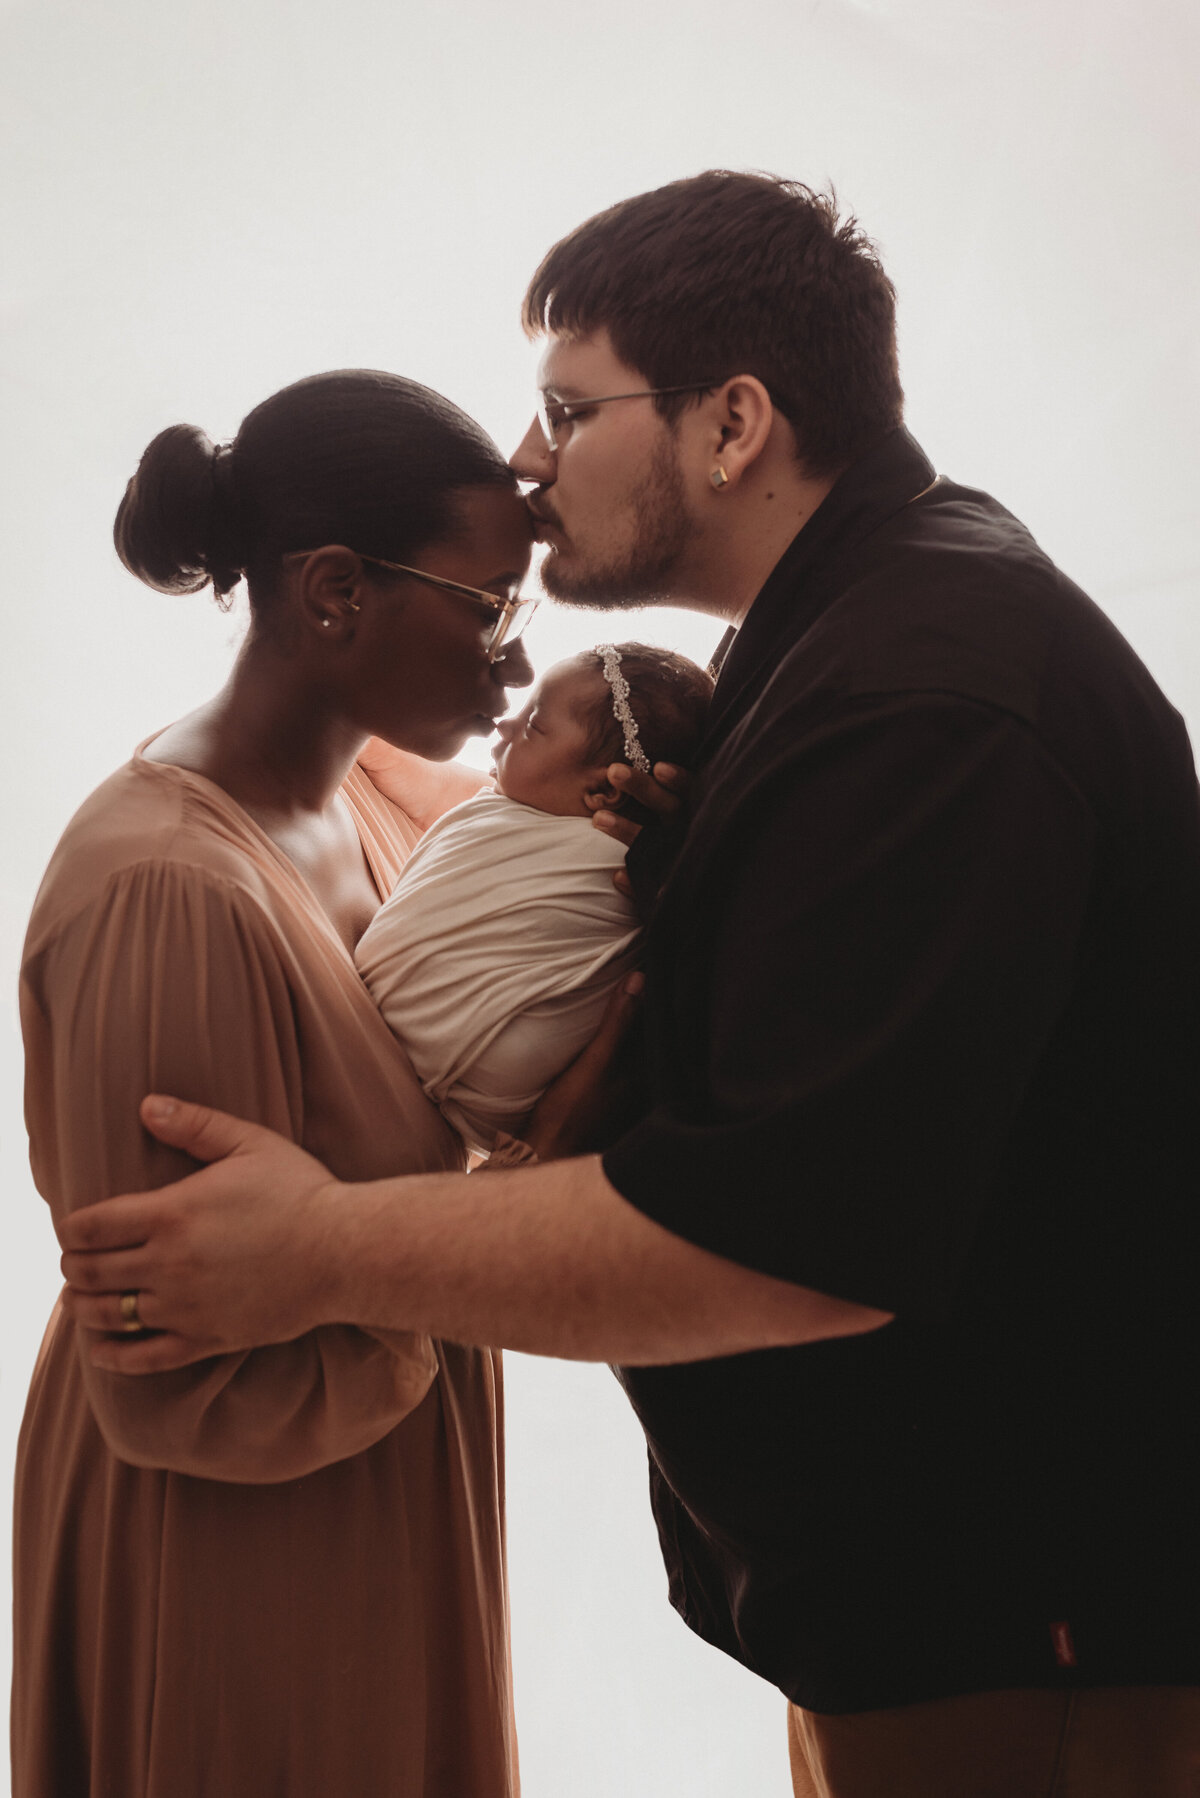 Newborn family portrait of dad kissing mom's forehead and mom kissing baby's nose at Marietta, GA newborn photography studio with mom, dad and baby girl wearing blush pink, cream and black